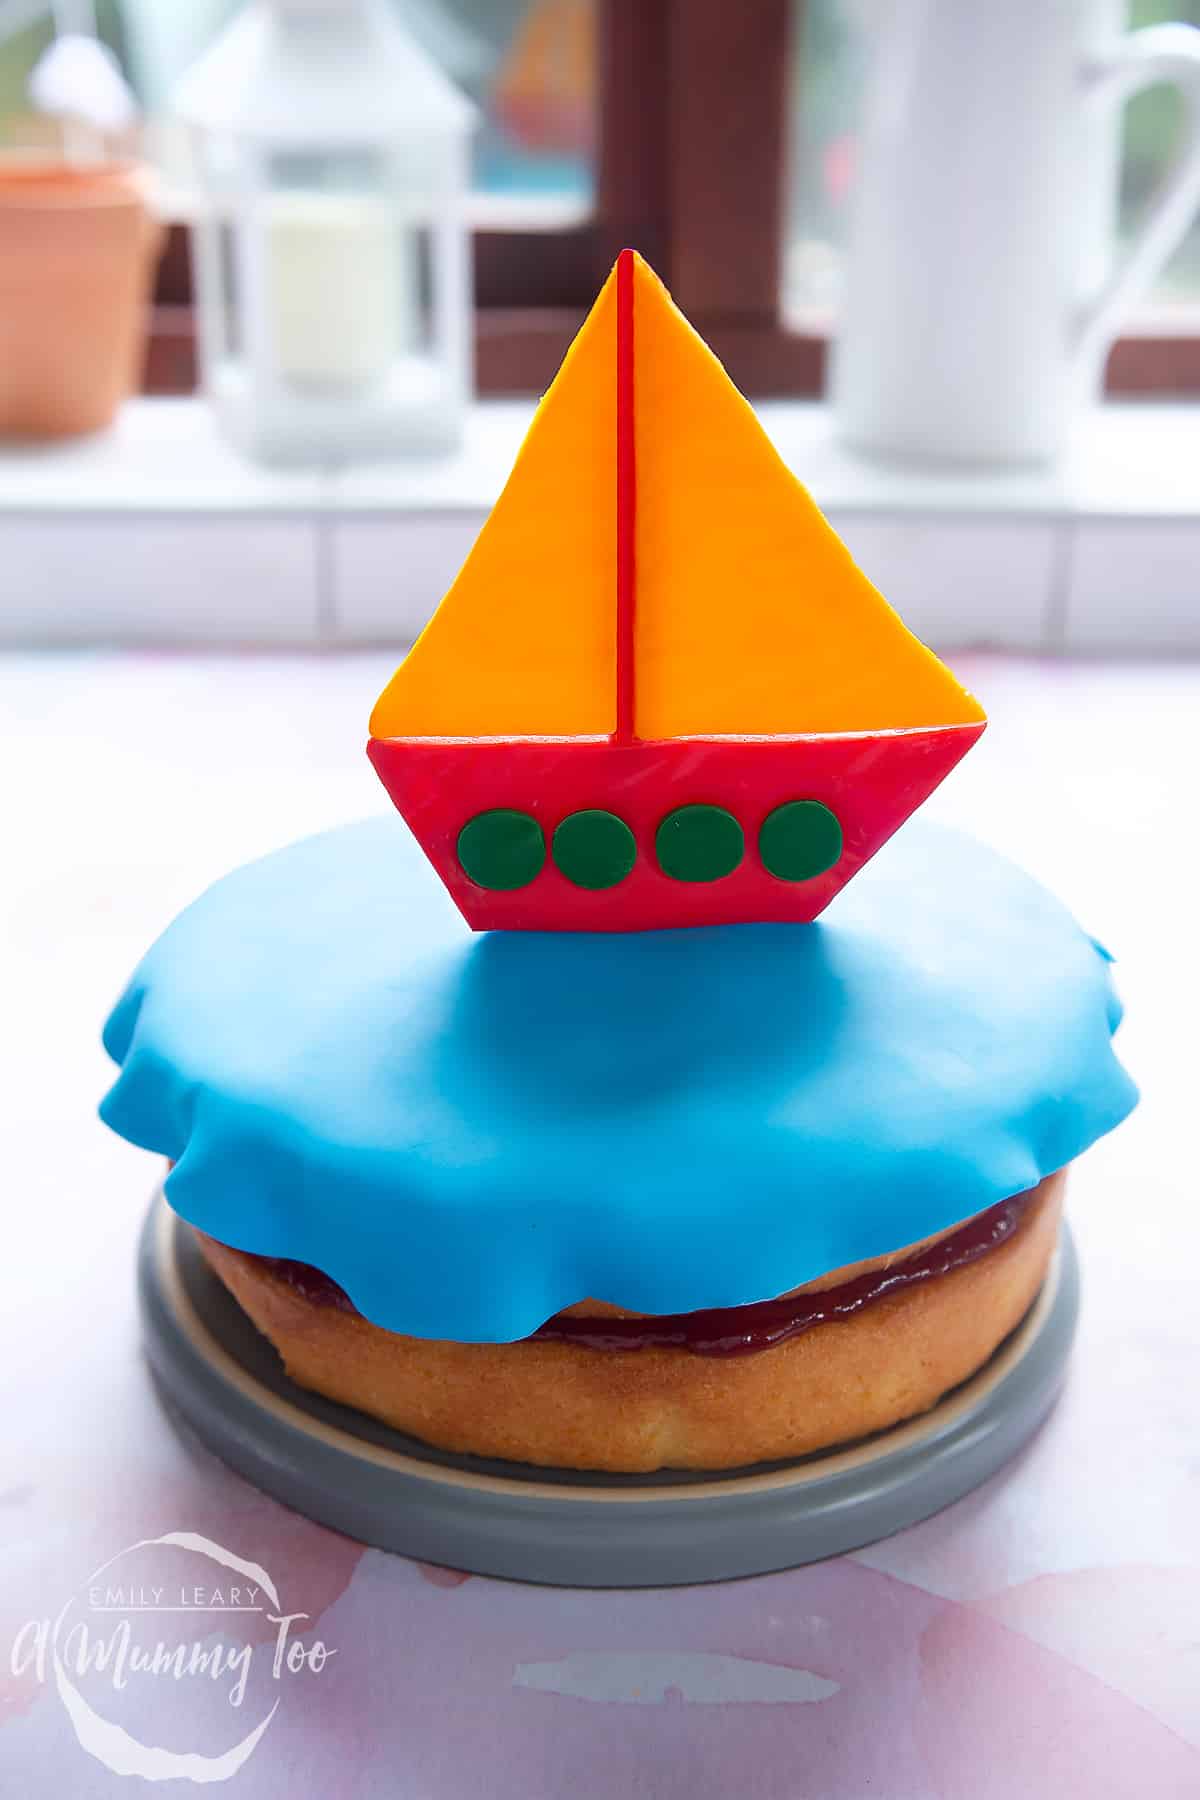 The finished sailboat cake made from sugar paste and sponge cake.